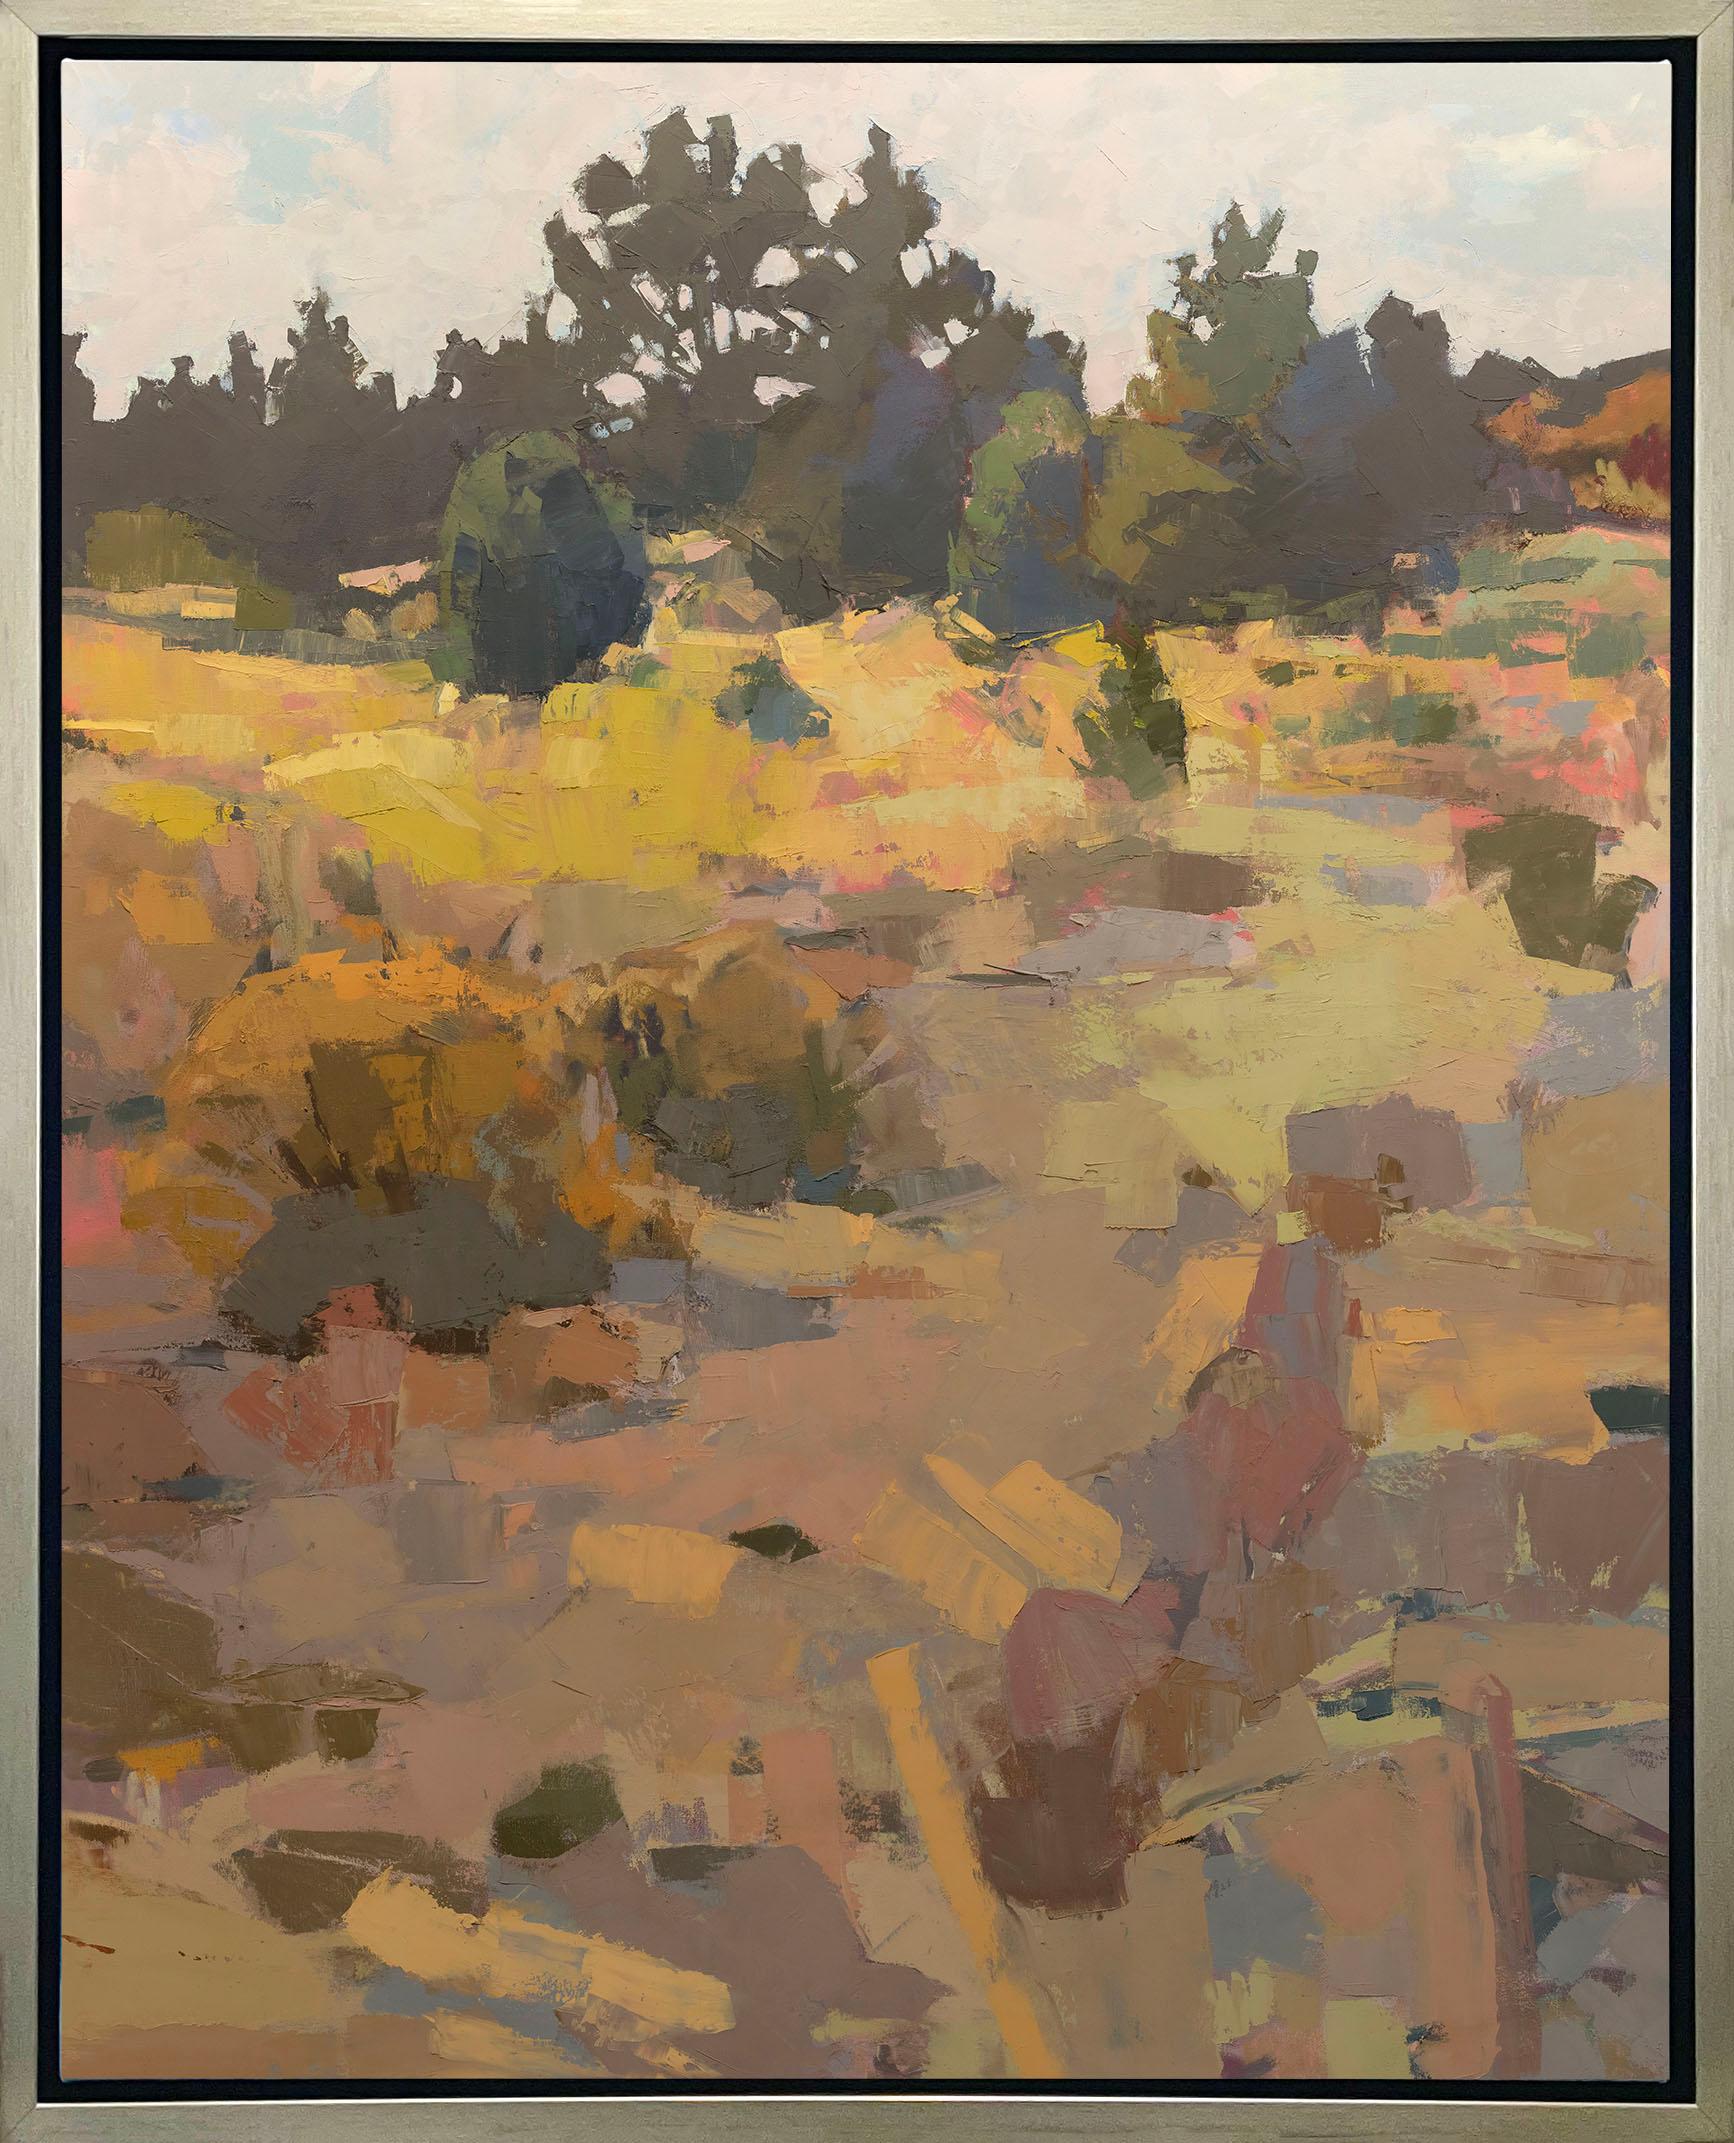 Bri Custer Landscape Print - "Short of Expectations" Framed Limited Edition Print, 30" x 24"